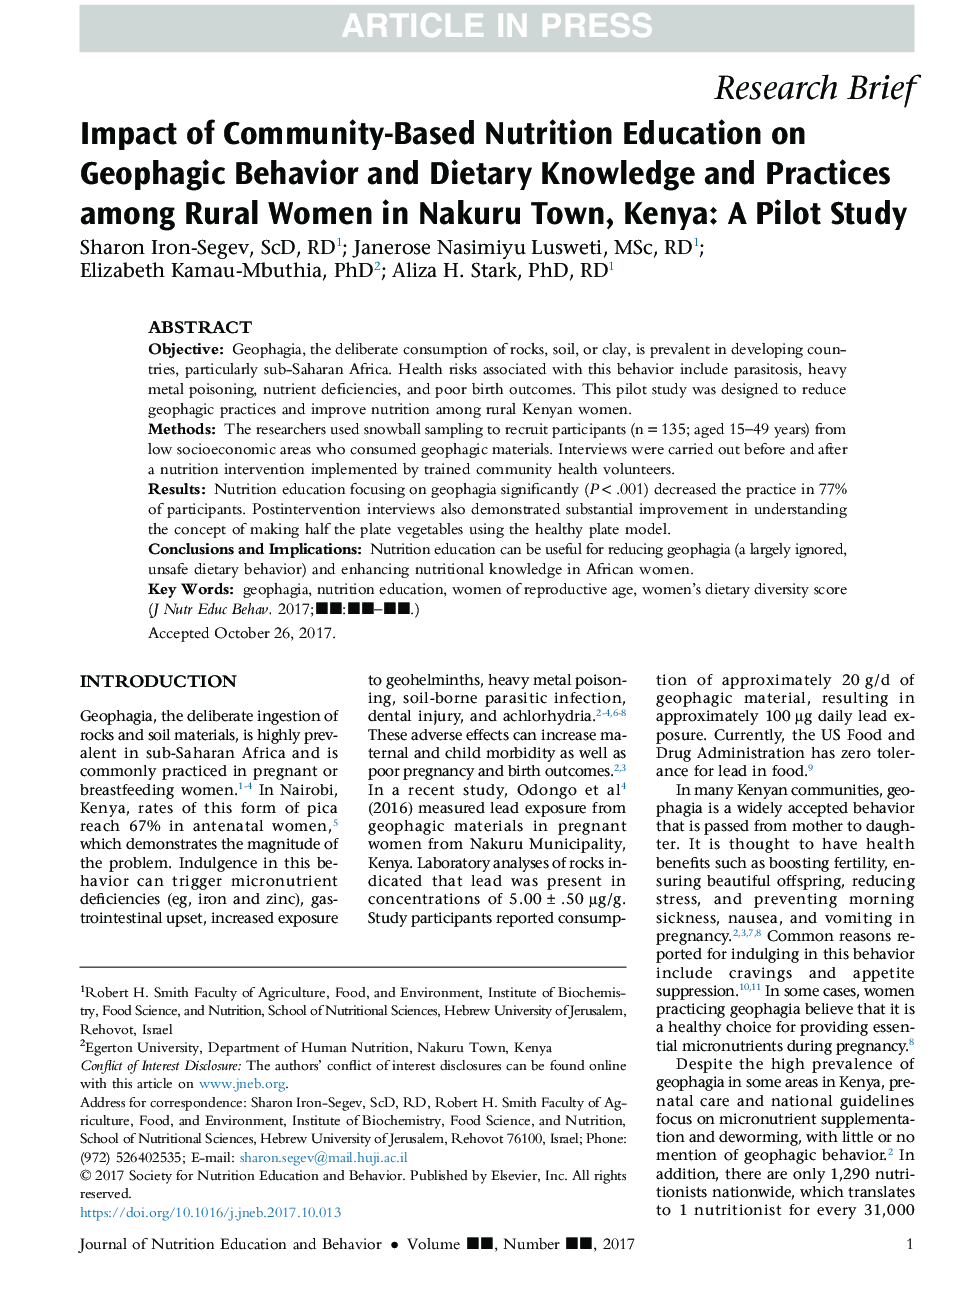 Impact of Community-Based Nutrition Education on Geophagic Behavior and Dietary Knowledge and Practices among Rural Women in Nakuru Town, Kenya: A Pilot Study